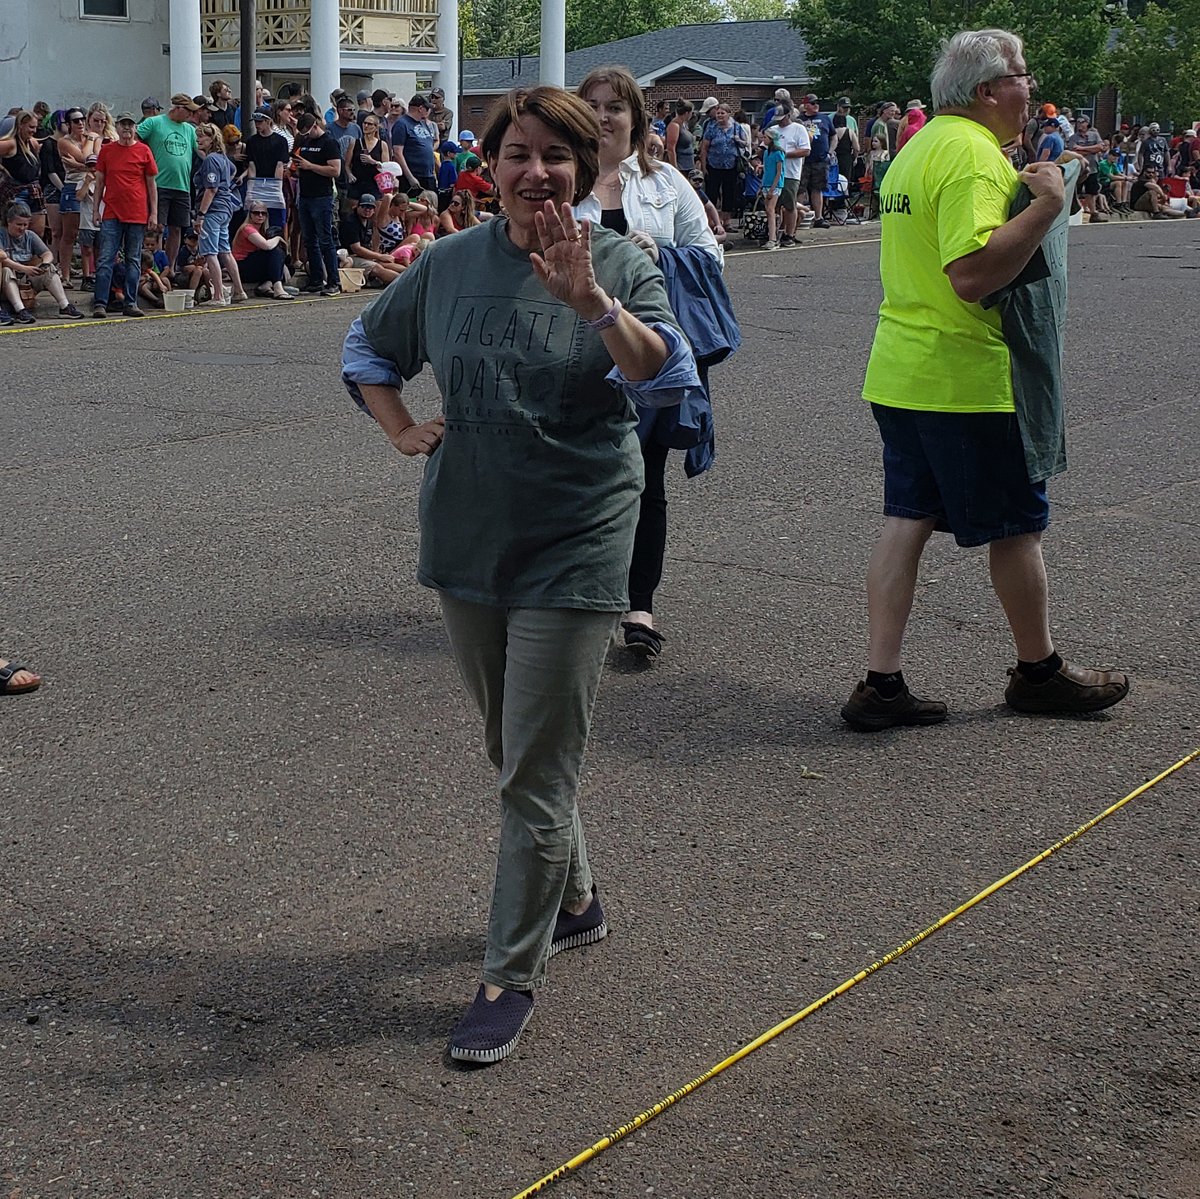 Great to see our friend US Senator, Amy Klobuchar, at Agate Days at Moose Lake, Minnesota today. Amy Klobuchar and Lake Superior agates are the best! https://t.co/o2OG9P52UU